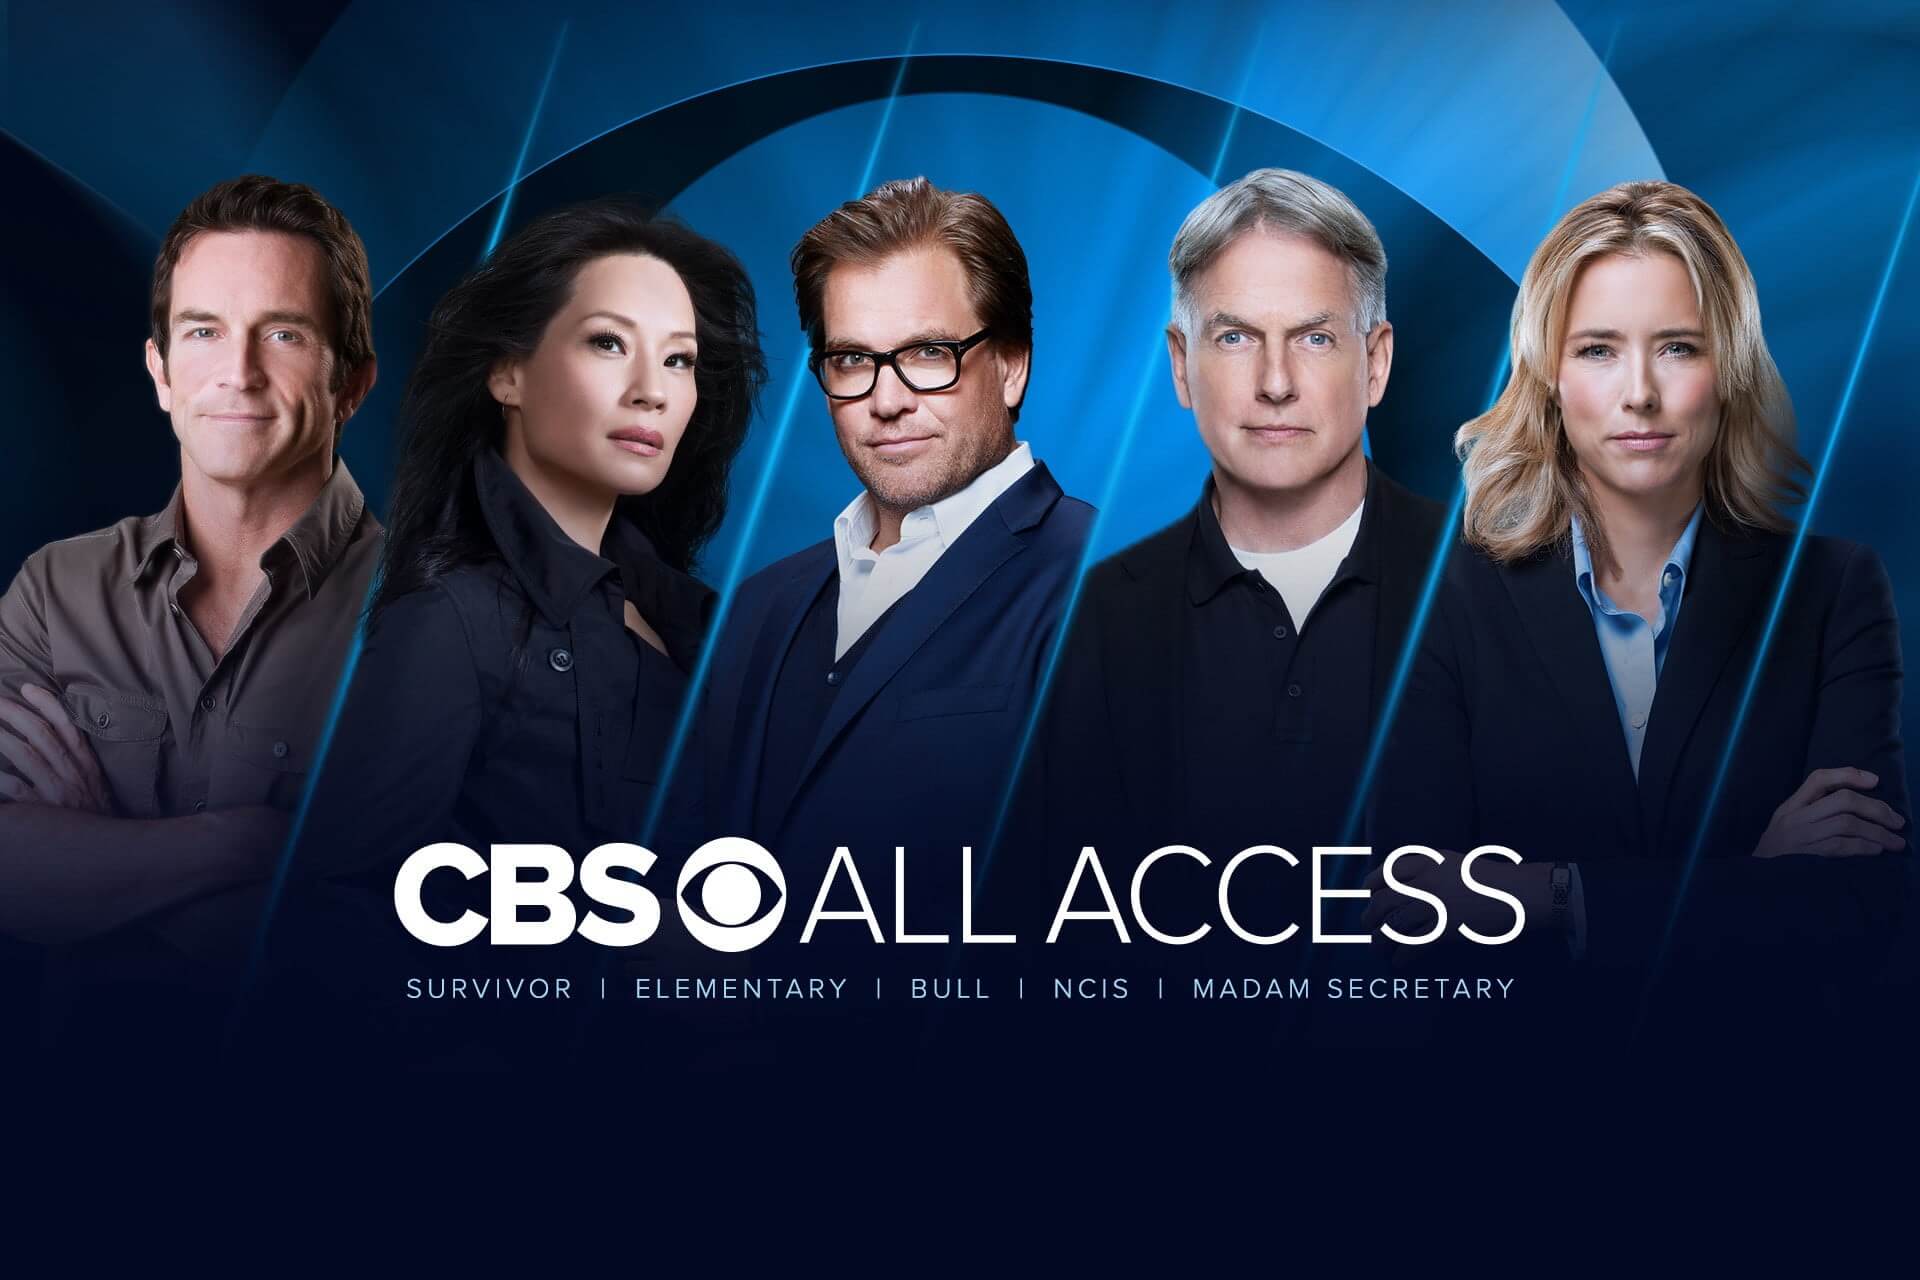 cbs all access not working on xbox